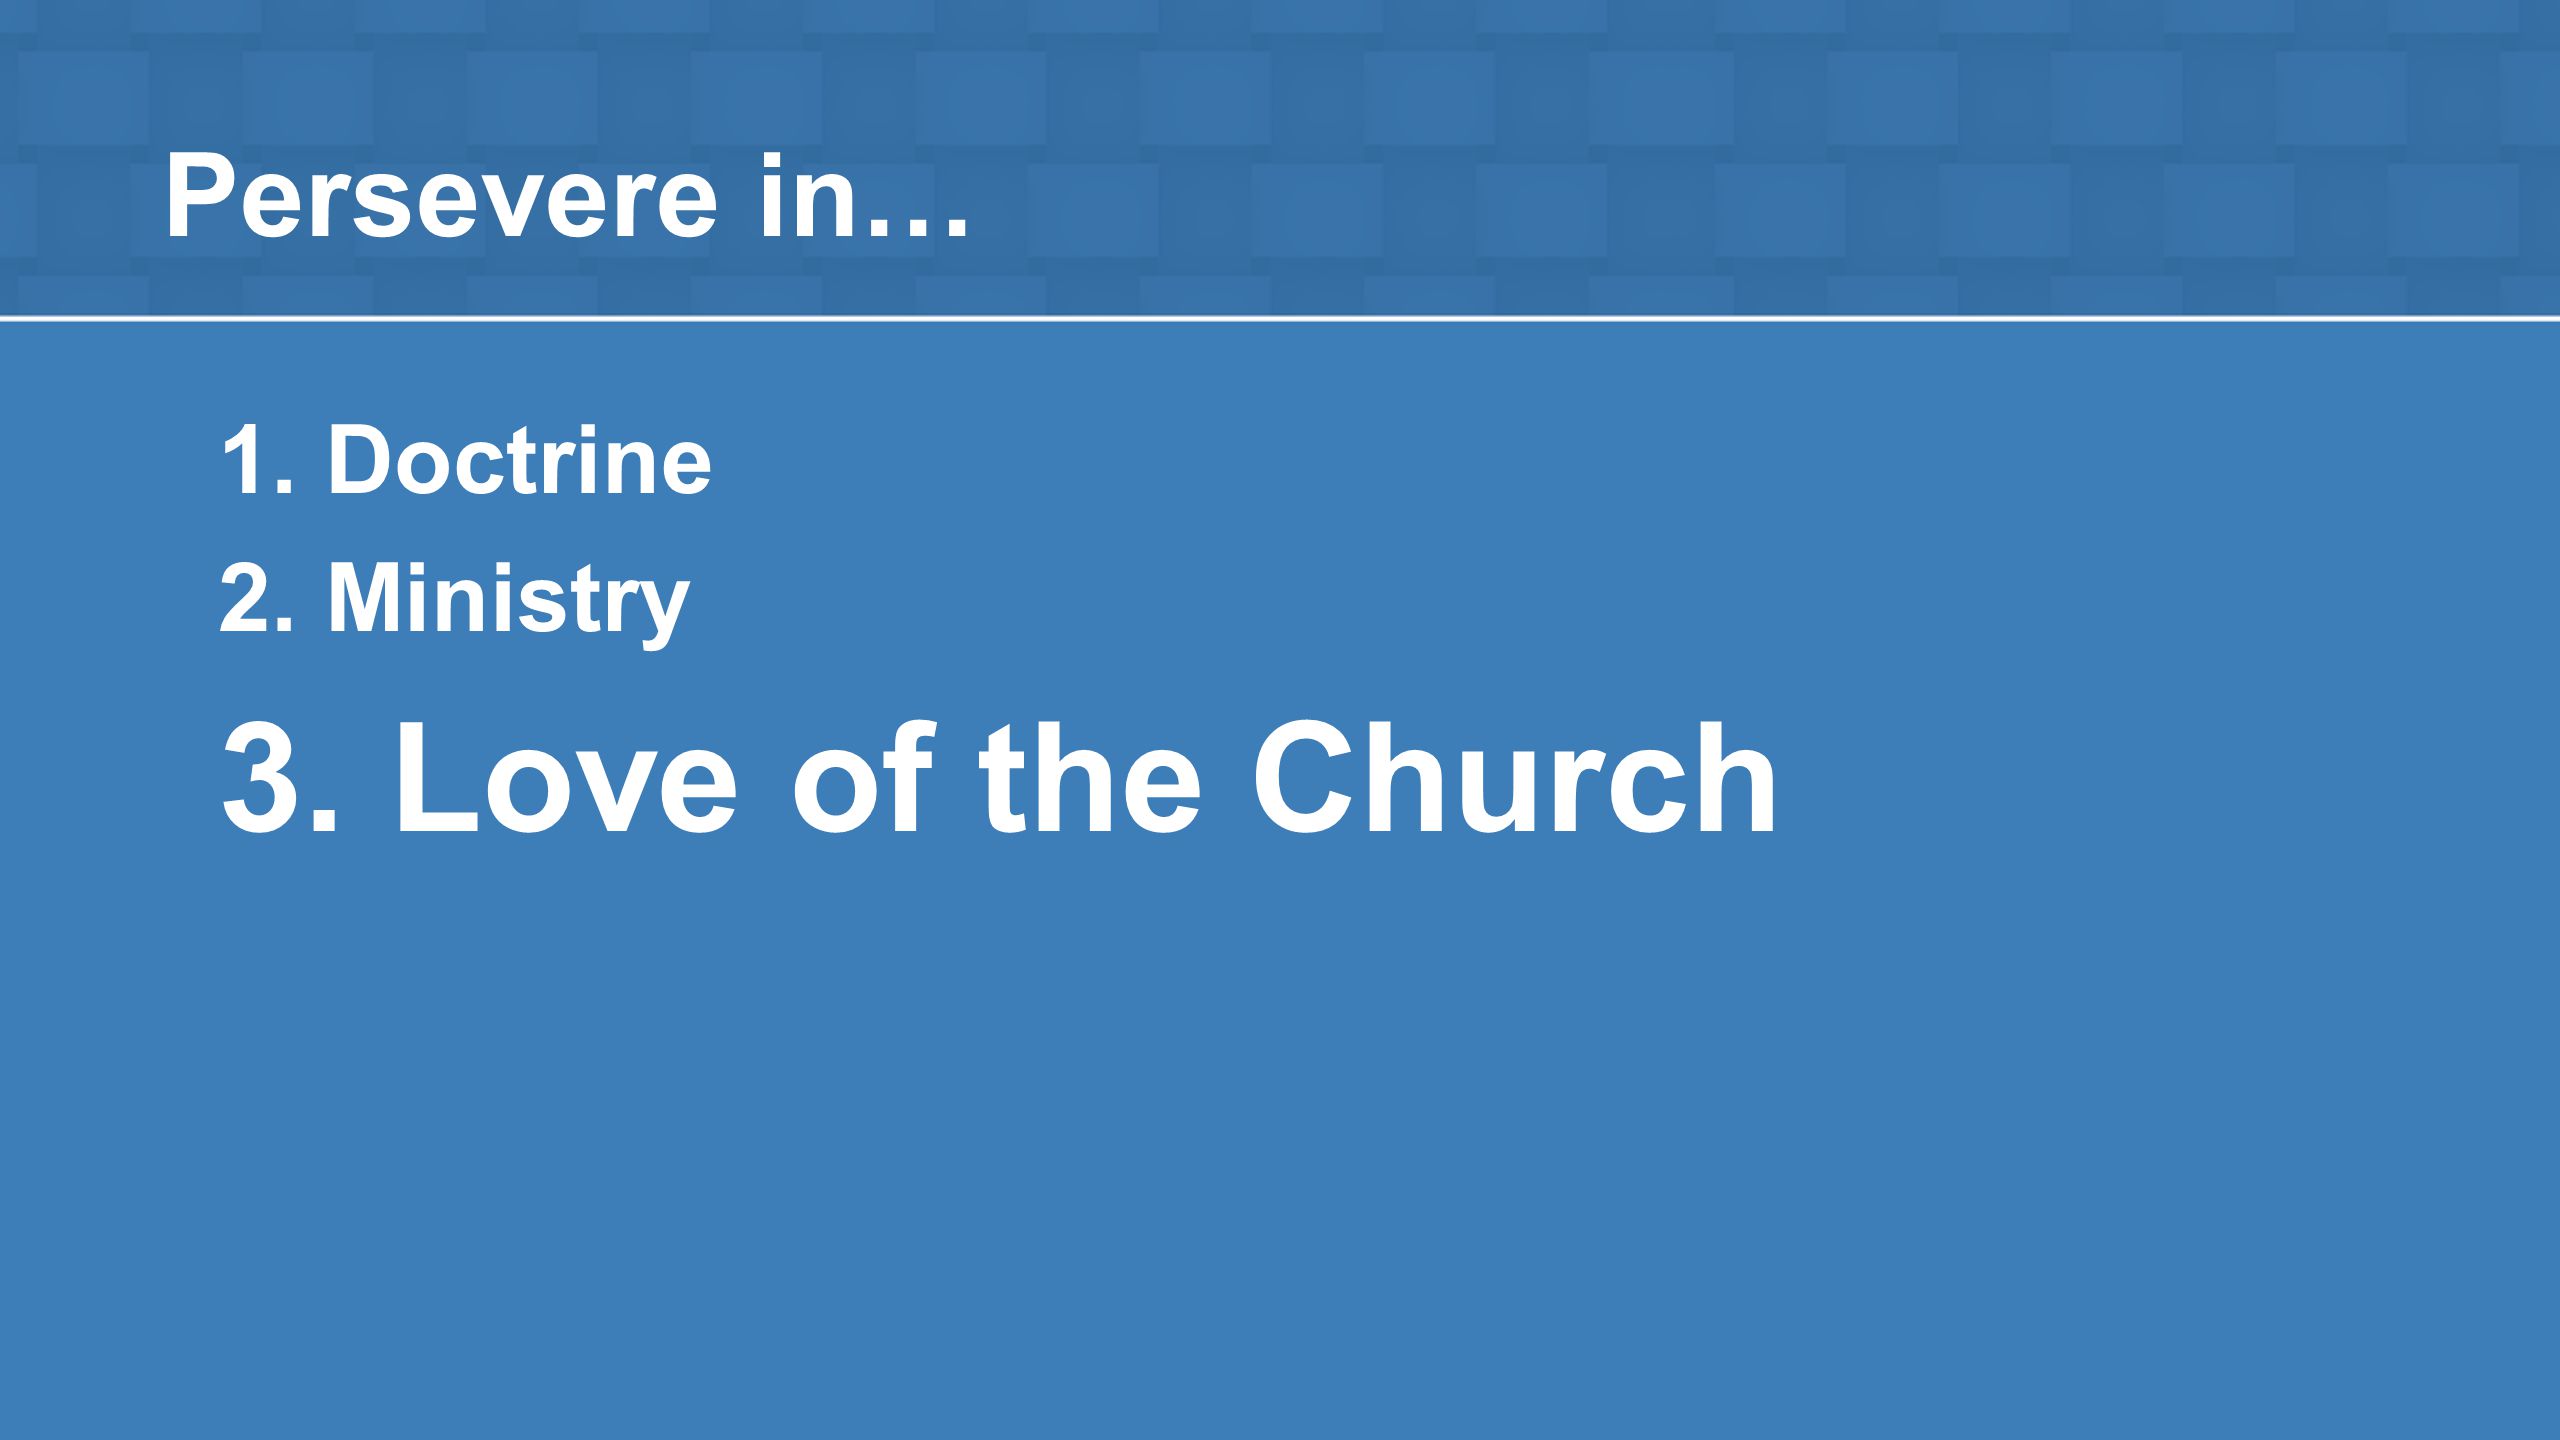 Persevere in… 1. Doctrine 2. Ministry 3. Love of the Church